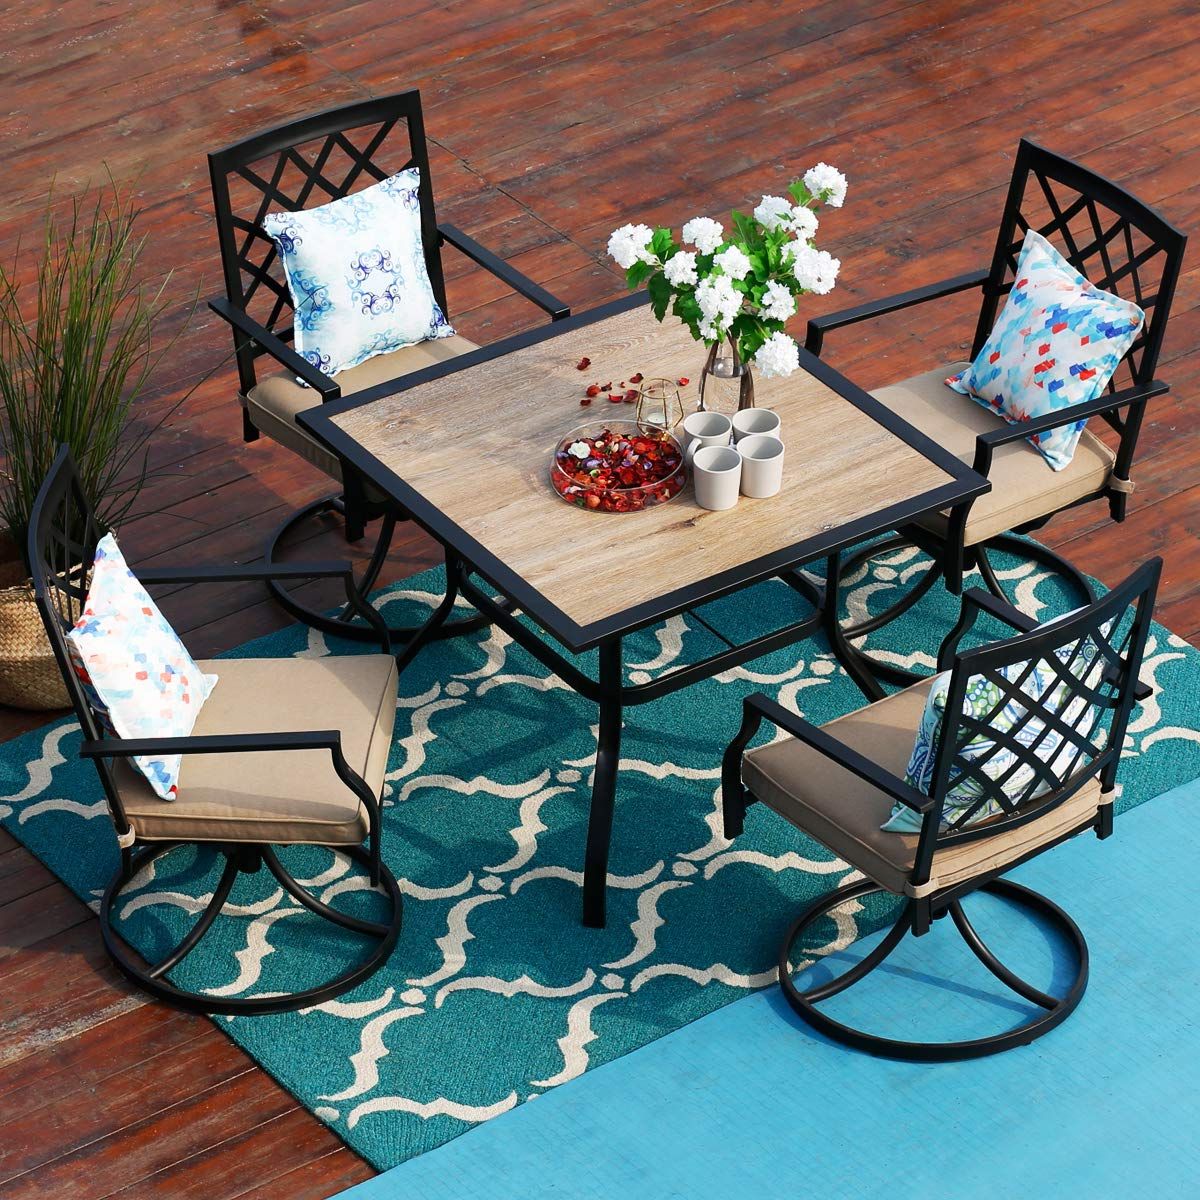 Popular Mf Studio 5 Piece Outdoor Patio Bistro Swivel Chairs And Wood Like Inside 5 Piece Patio Dining Set (View 9 of 15)